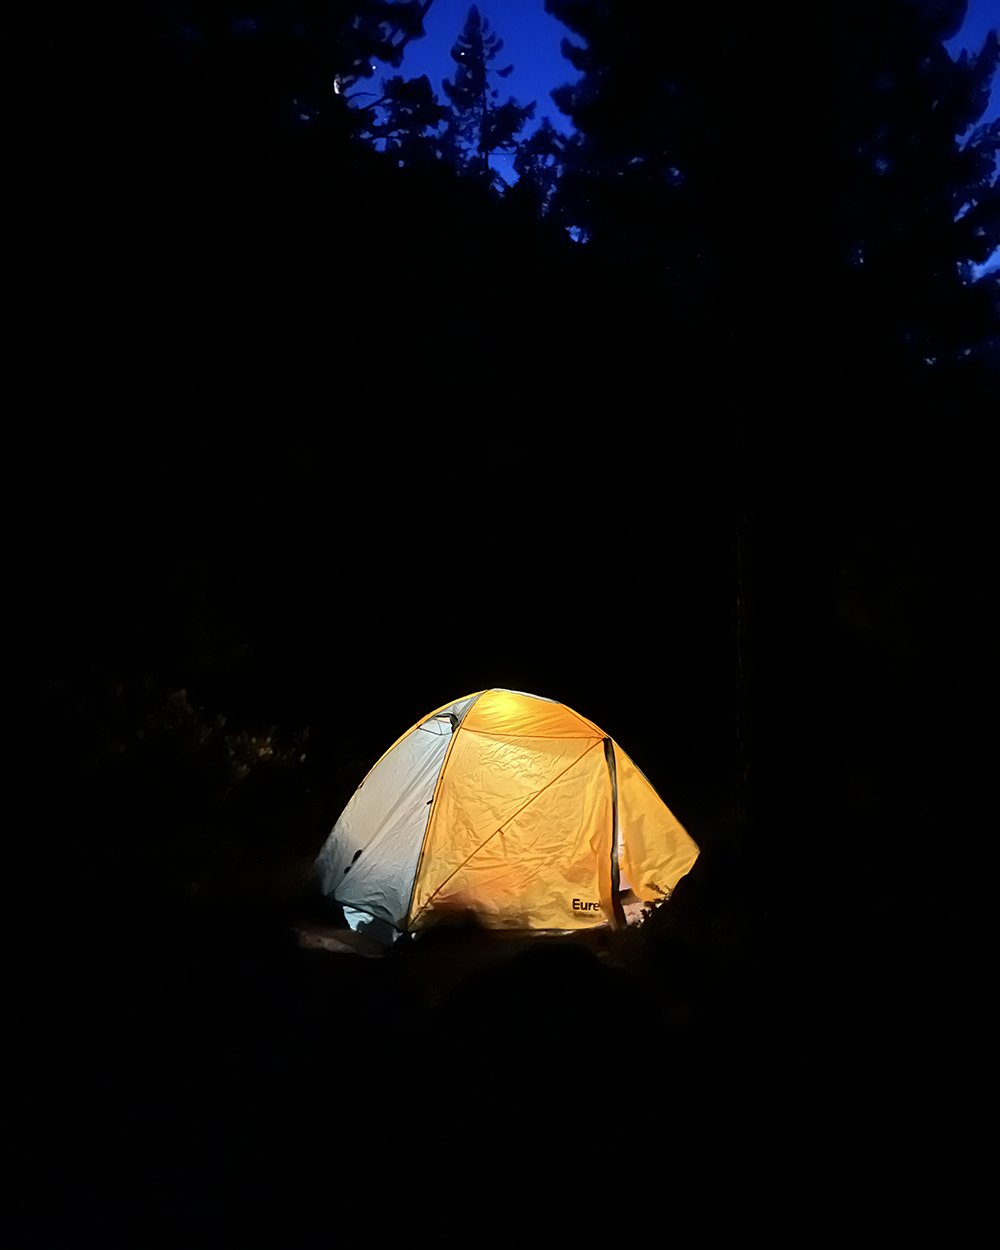  This tent was home sweet home for a full week.  